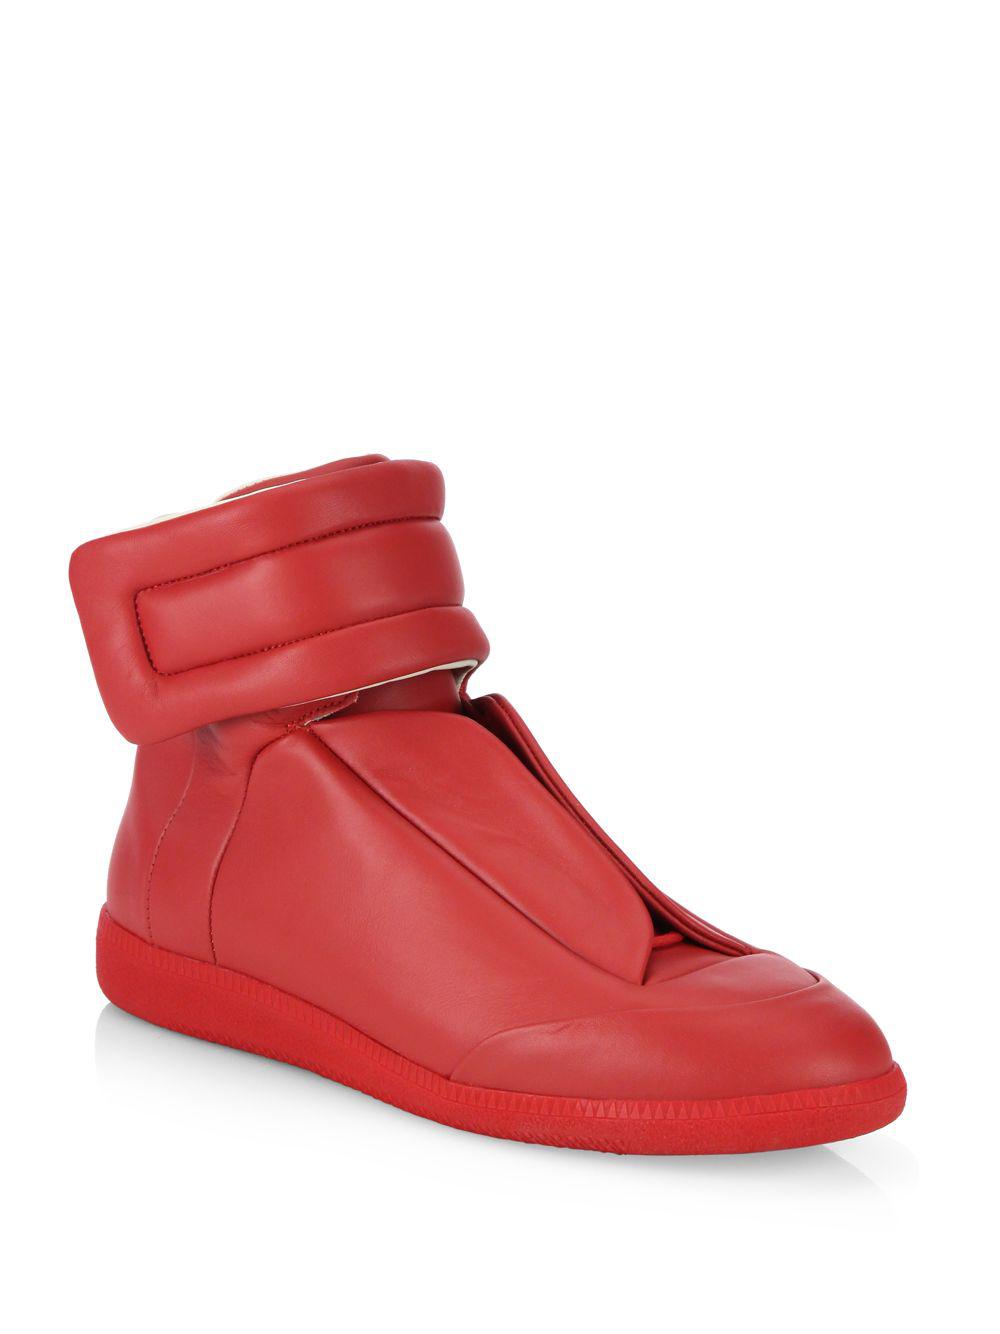 Maison Margiela Future Leather High-top Sneakers in Red - Lyst